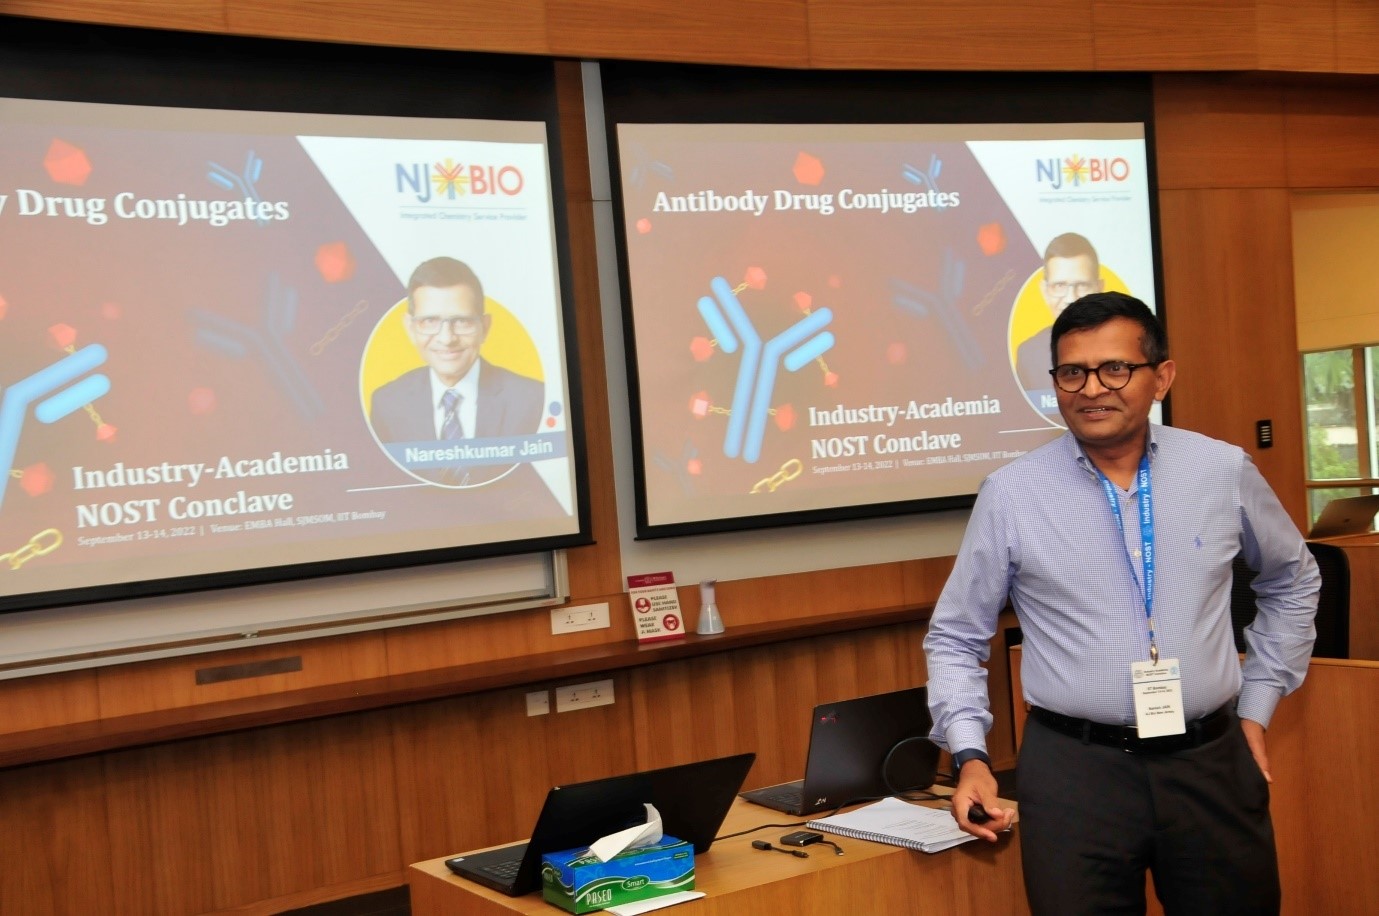 Dr. Jain presenting a talk on ADCs at the Industry-Academia NOST Conclave at IIT, Mumbai (Bombay), India